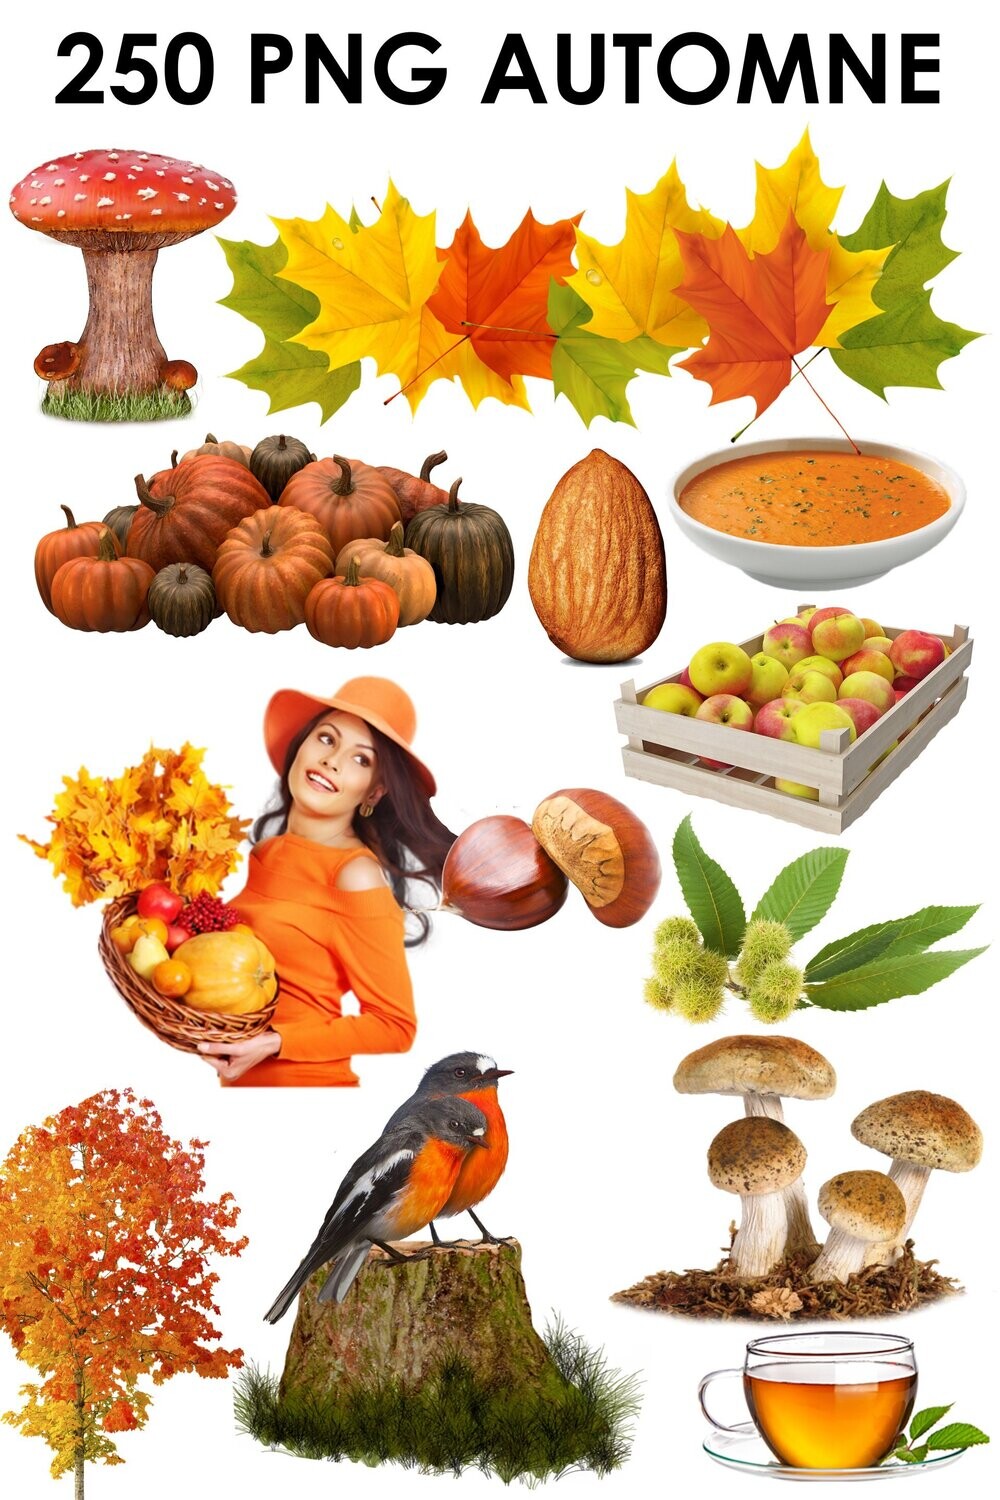 E. PACK AUTOMNE 250 PNG